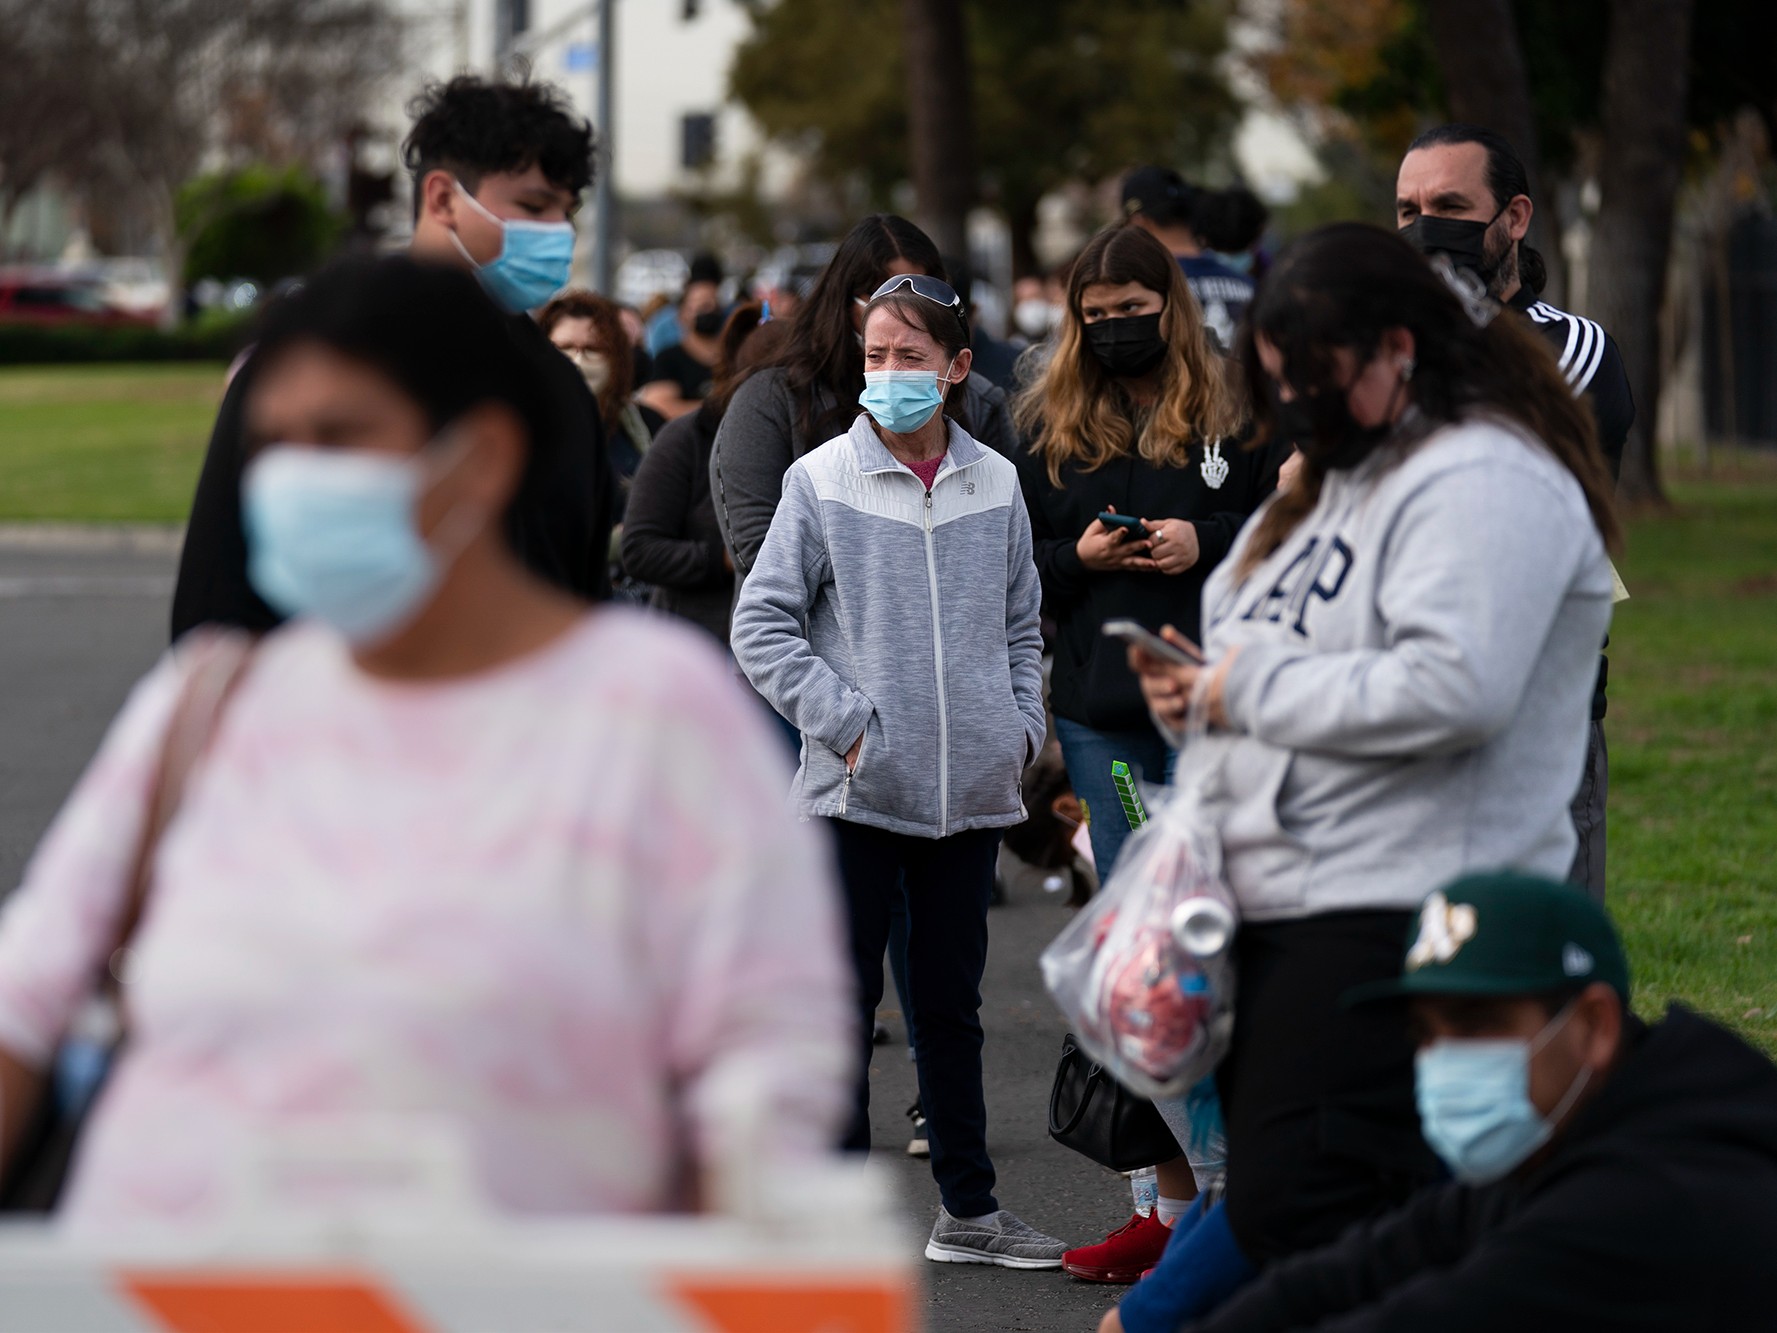 California's Pandemic 'State of Emergency' Ends | Resources Still Available  - capradio.org